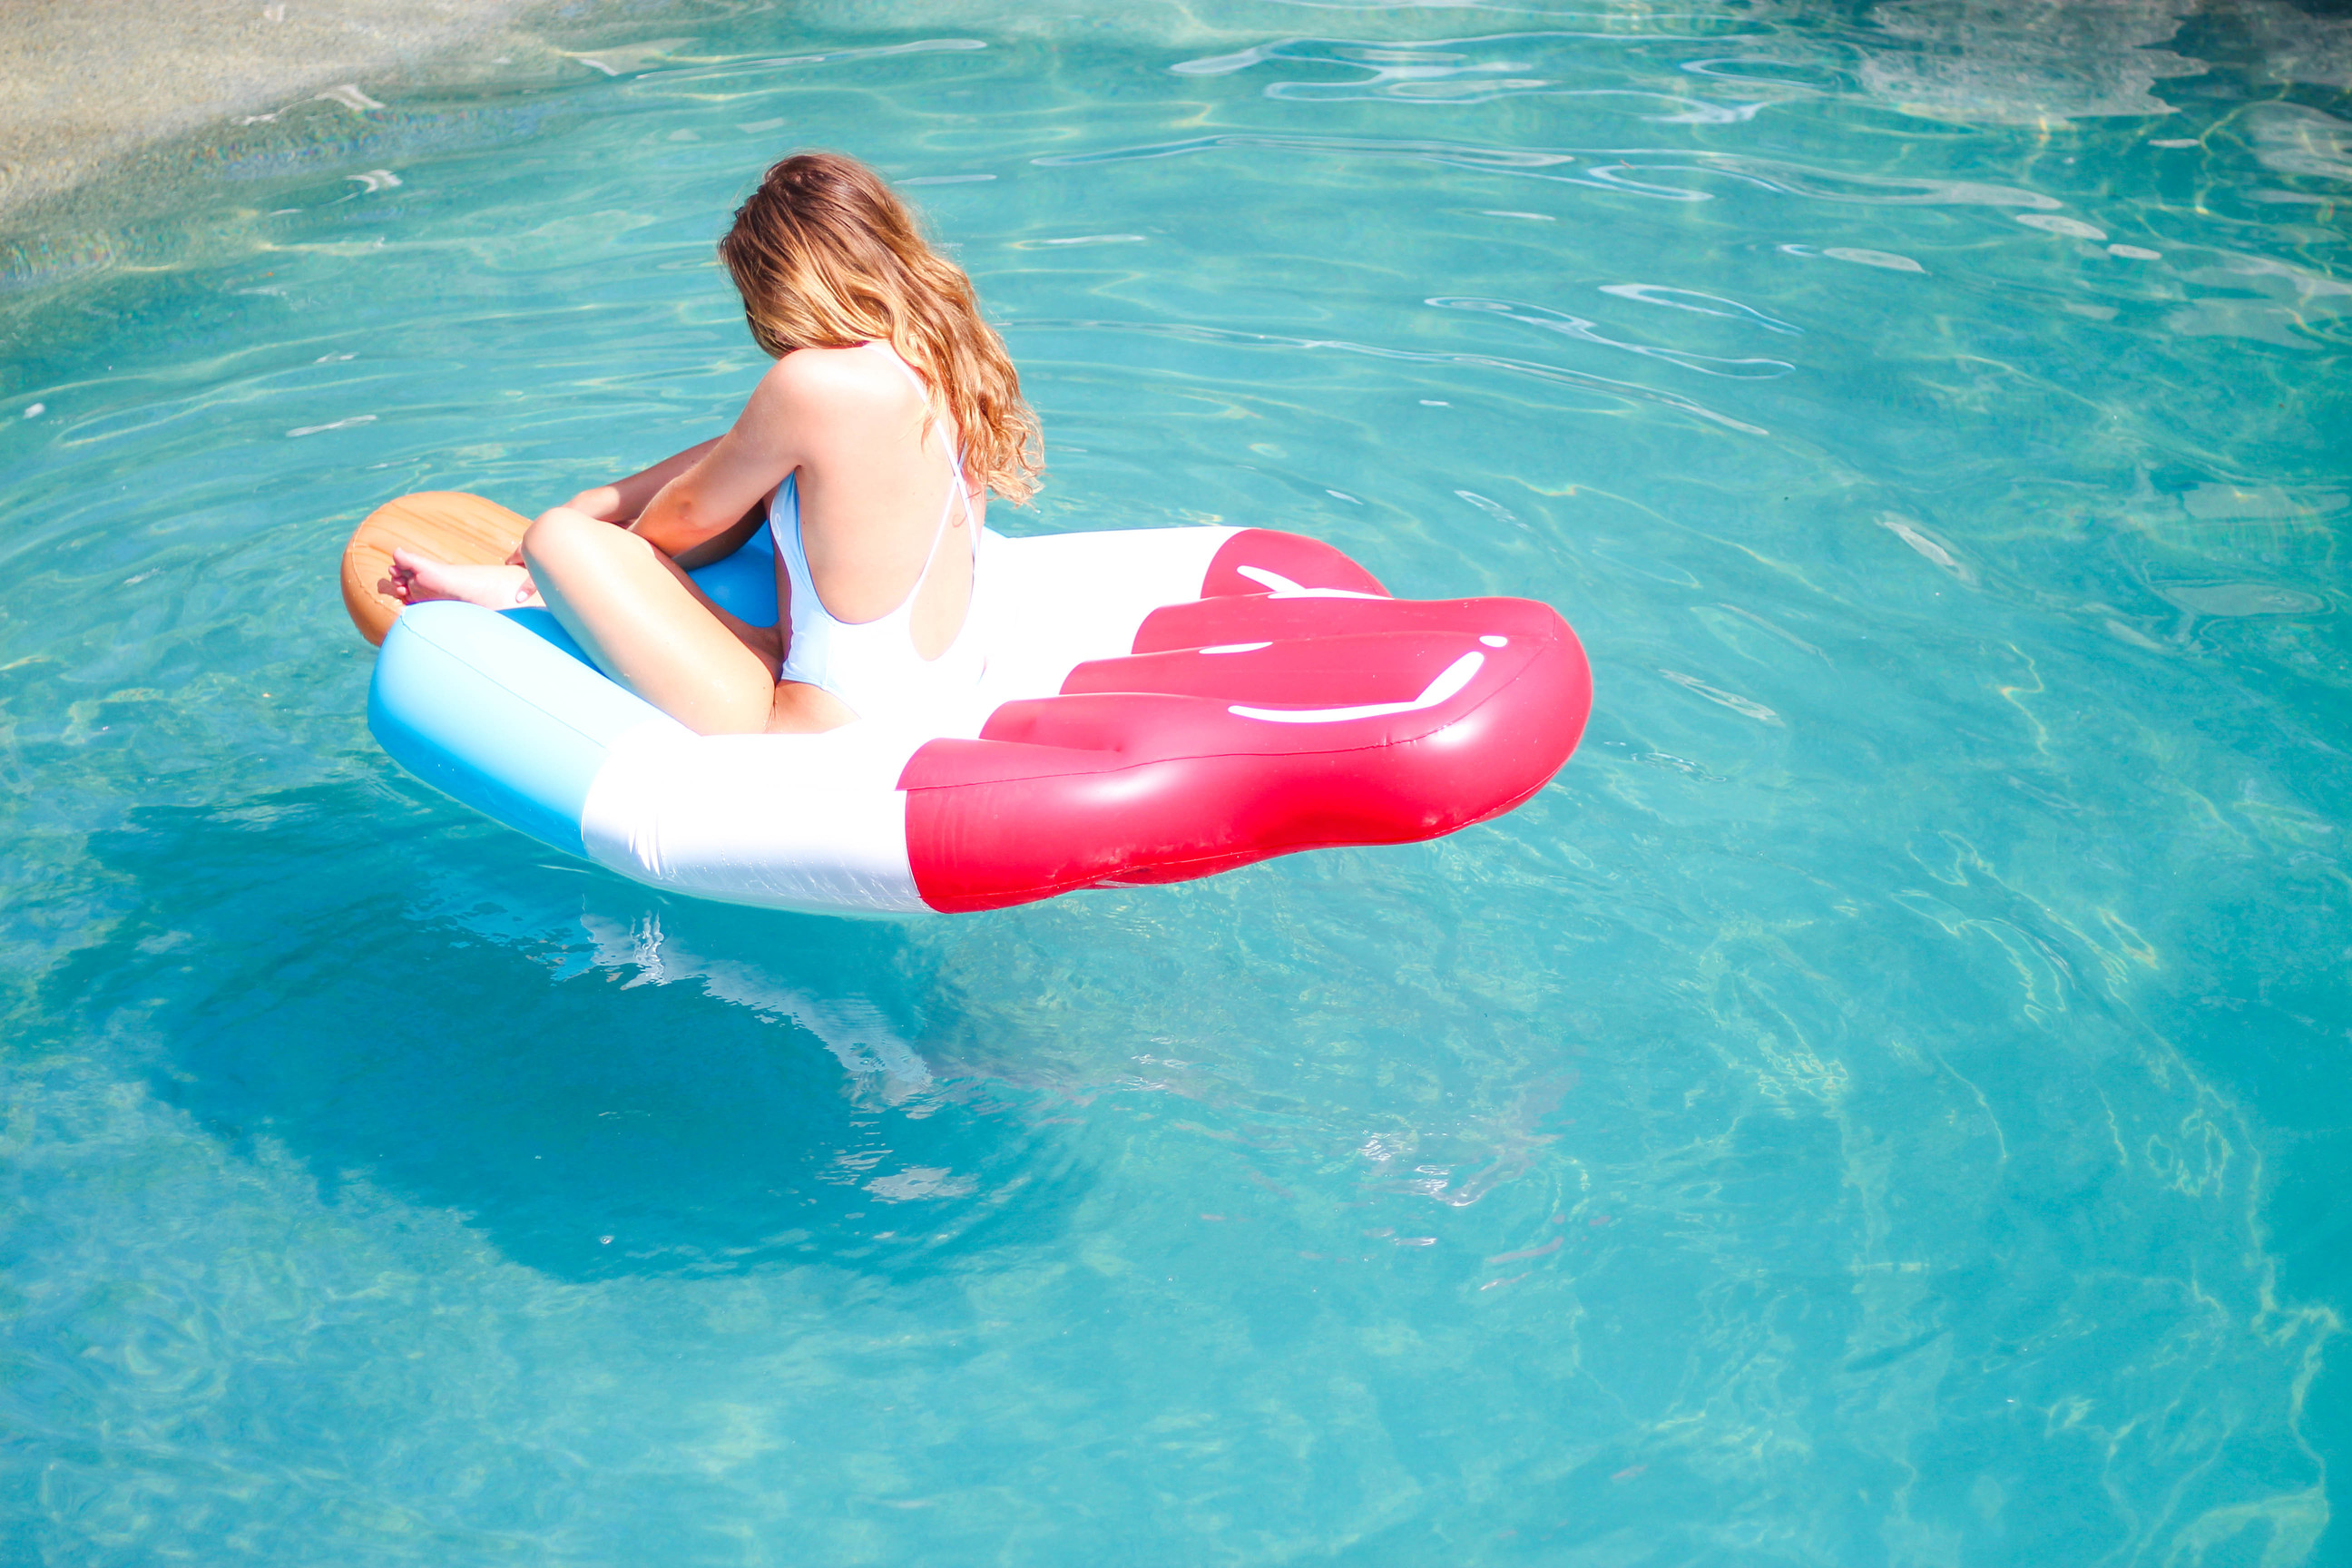 My Favorite Summer Pool Floats | Summer trends, swan pool float, flamingo pool float, donut pool float daily dose of charm lauren lindmark